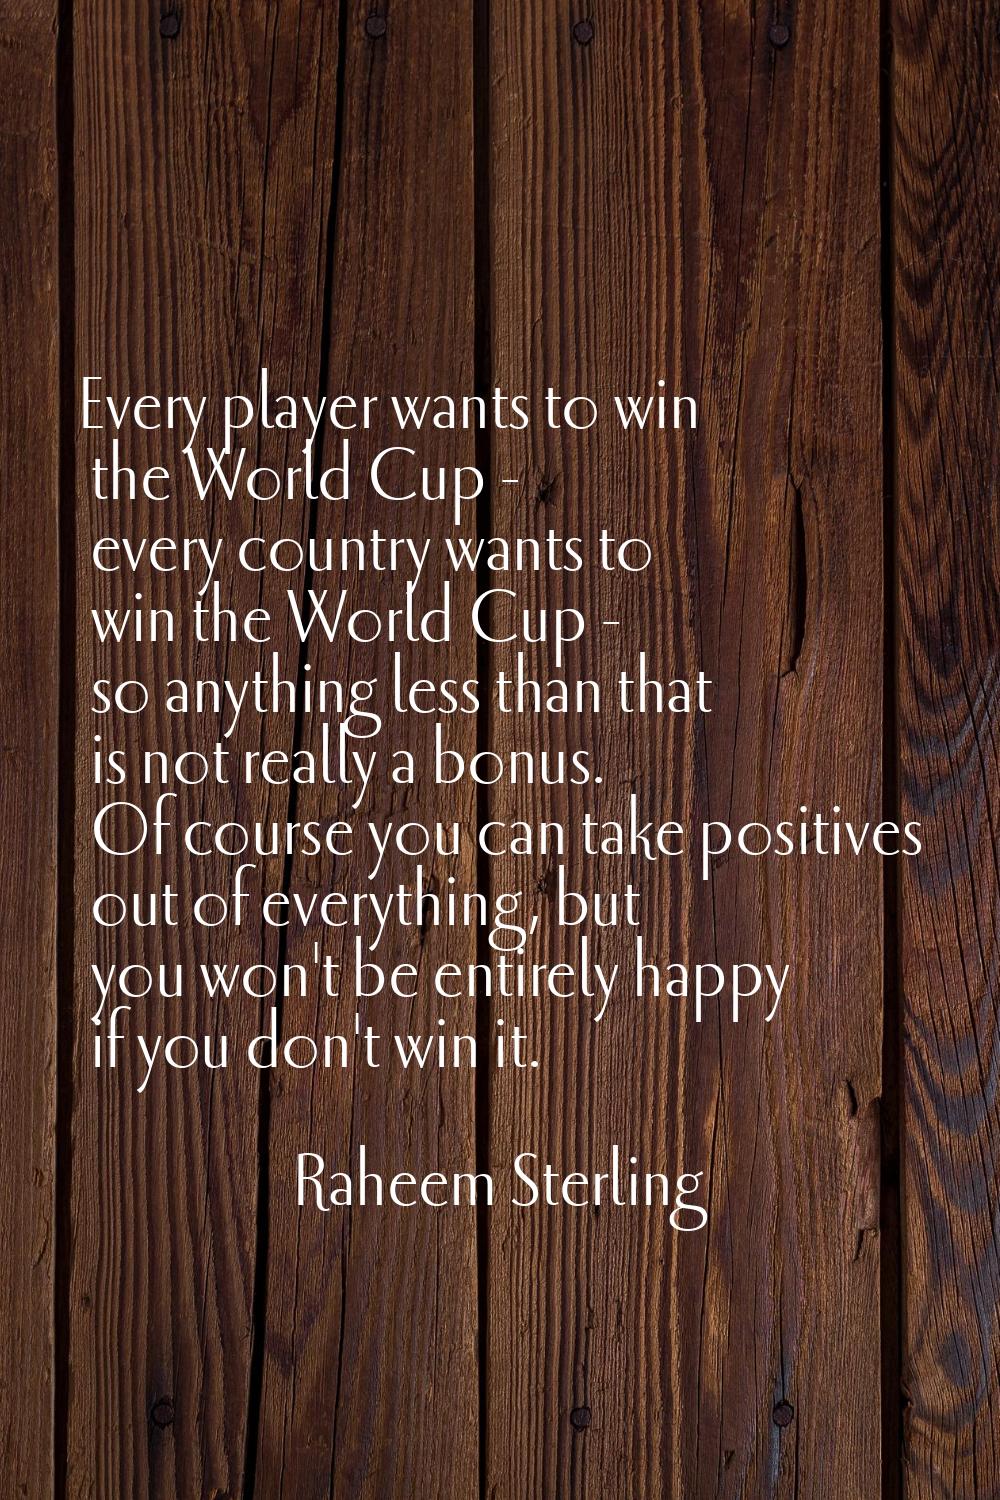 Every player wants to win the World Cup - every country wants to win the World Cup - so anything le